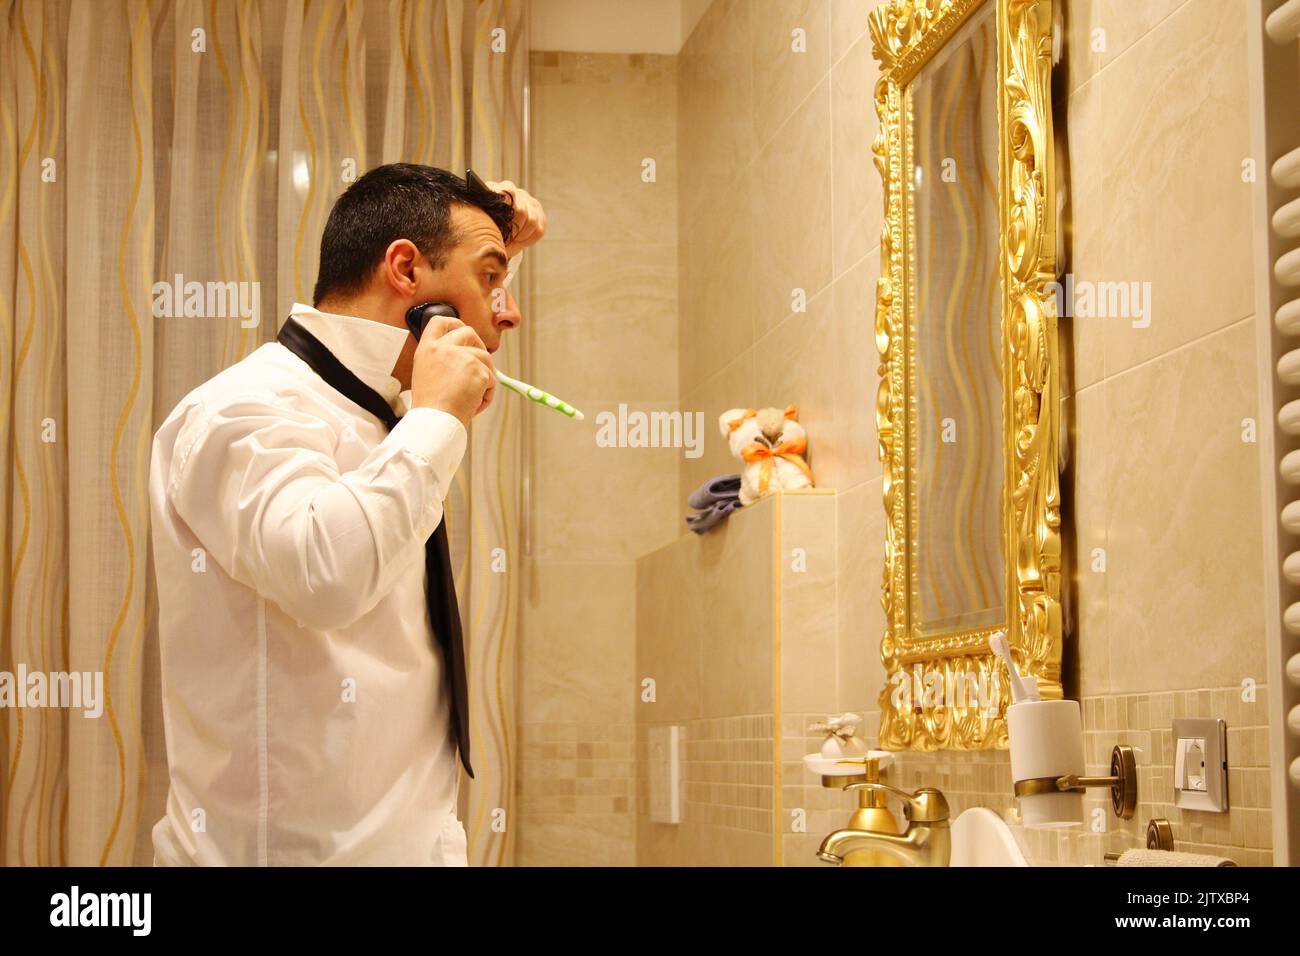 businessman in bathroom late for work while combing, brushing teeth and shaving at the same time Stock Photo